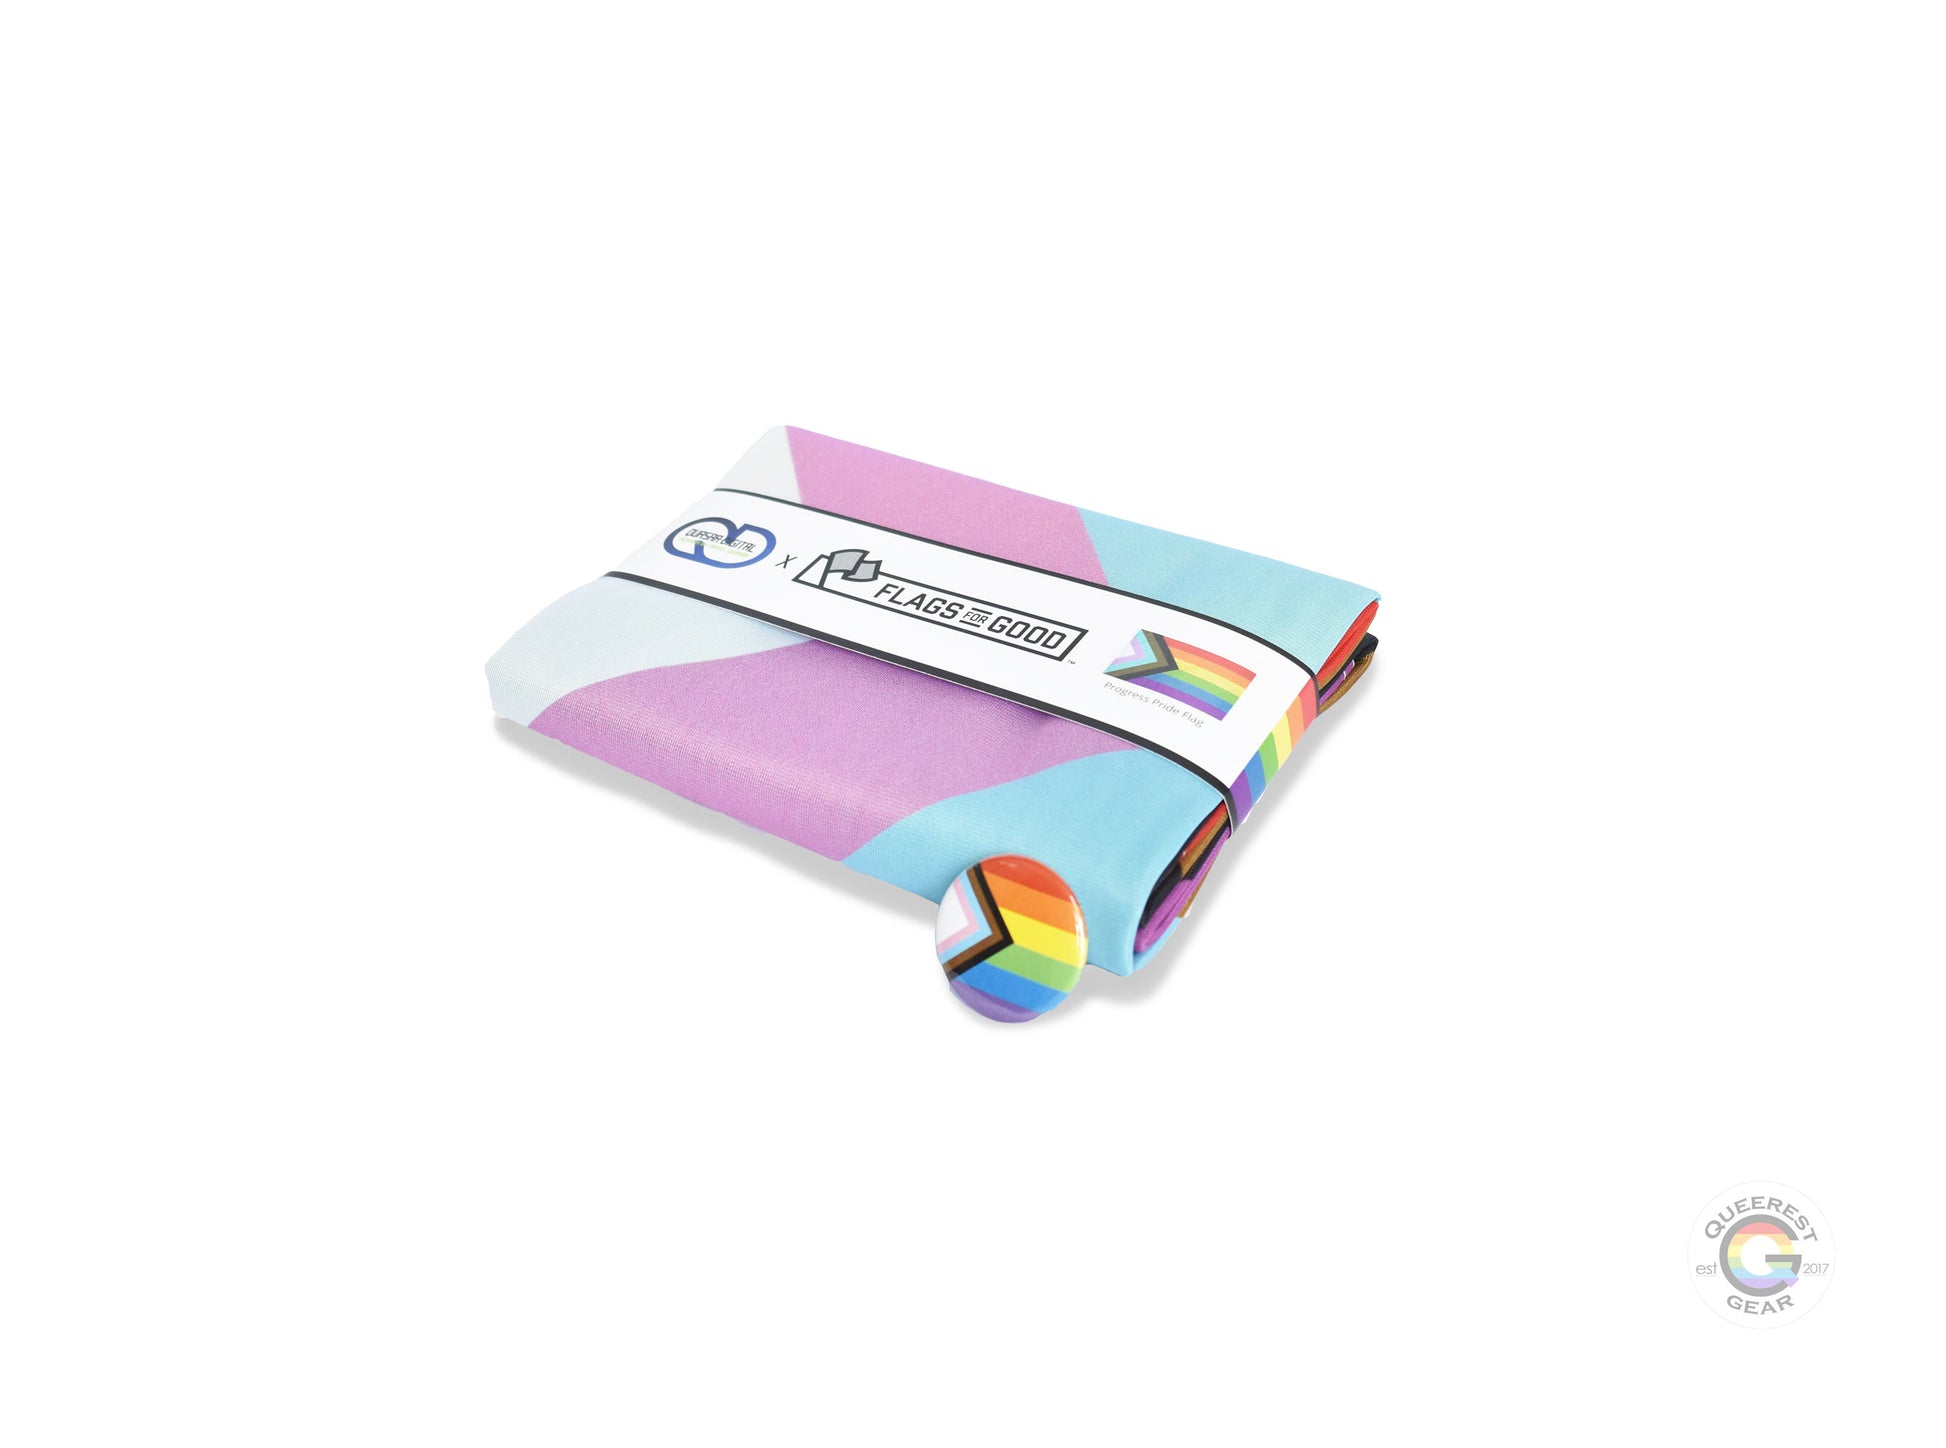  The progress pride flag folded in its packaging with the matching free progress flag button